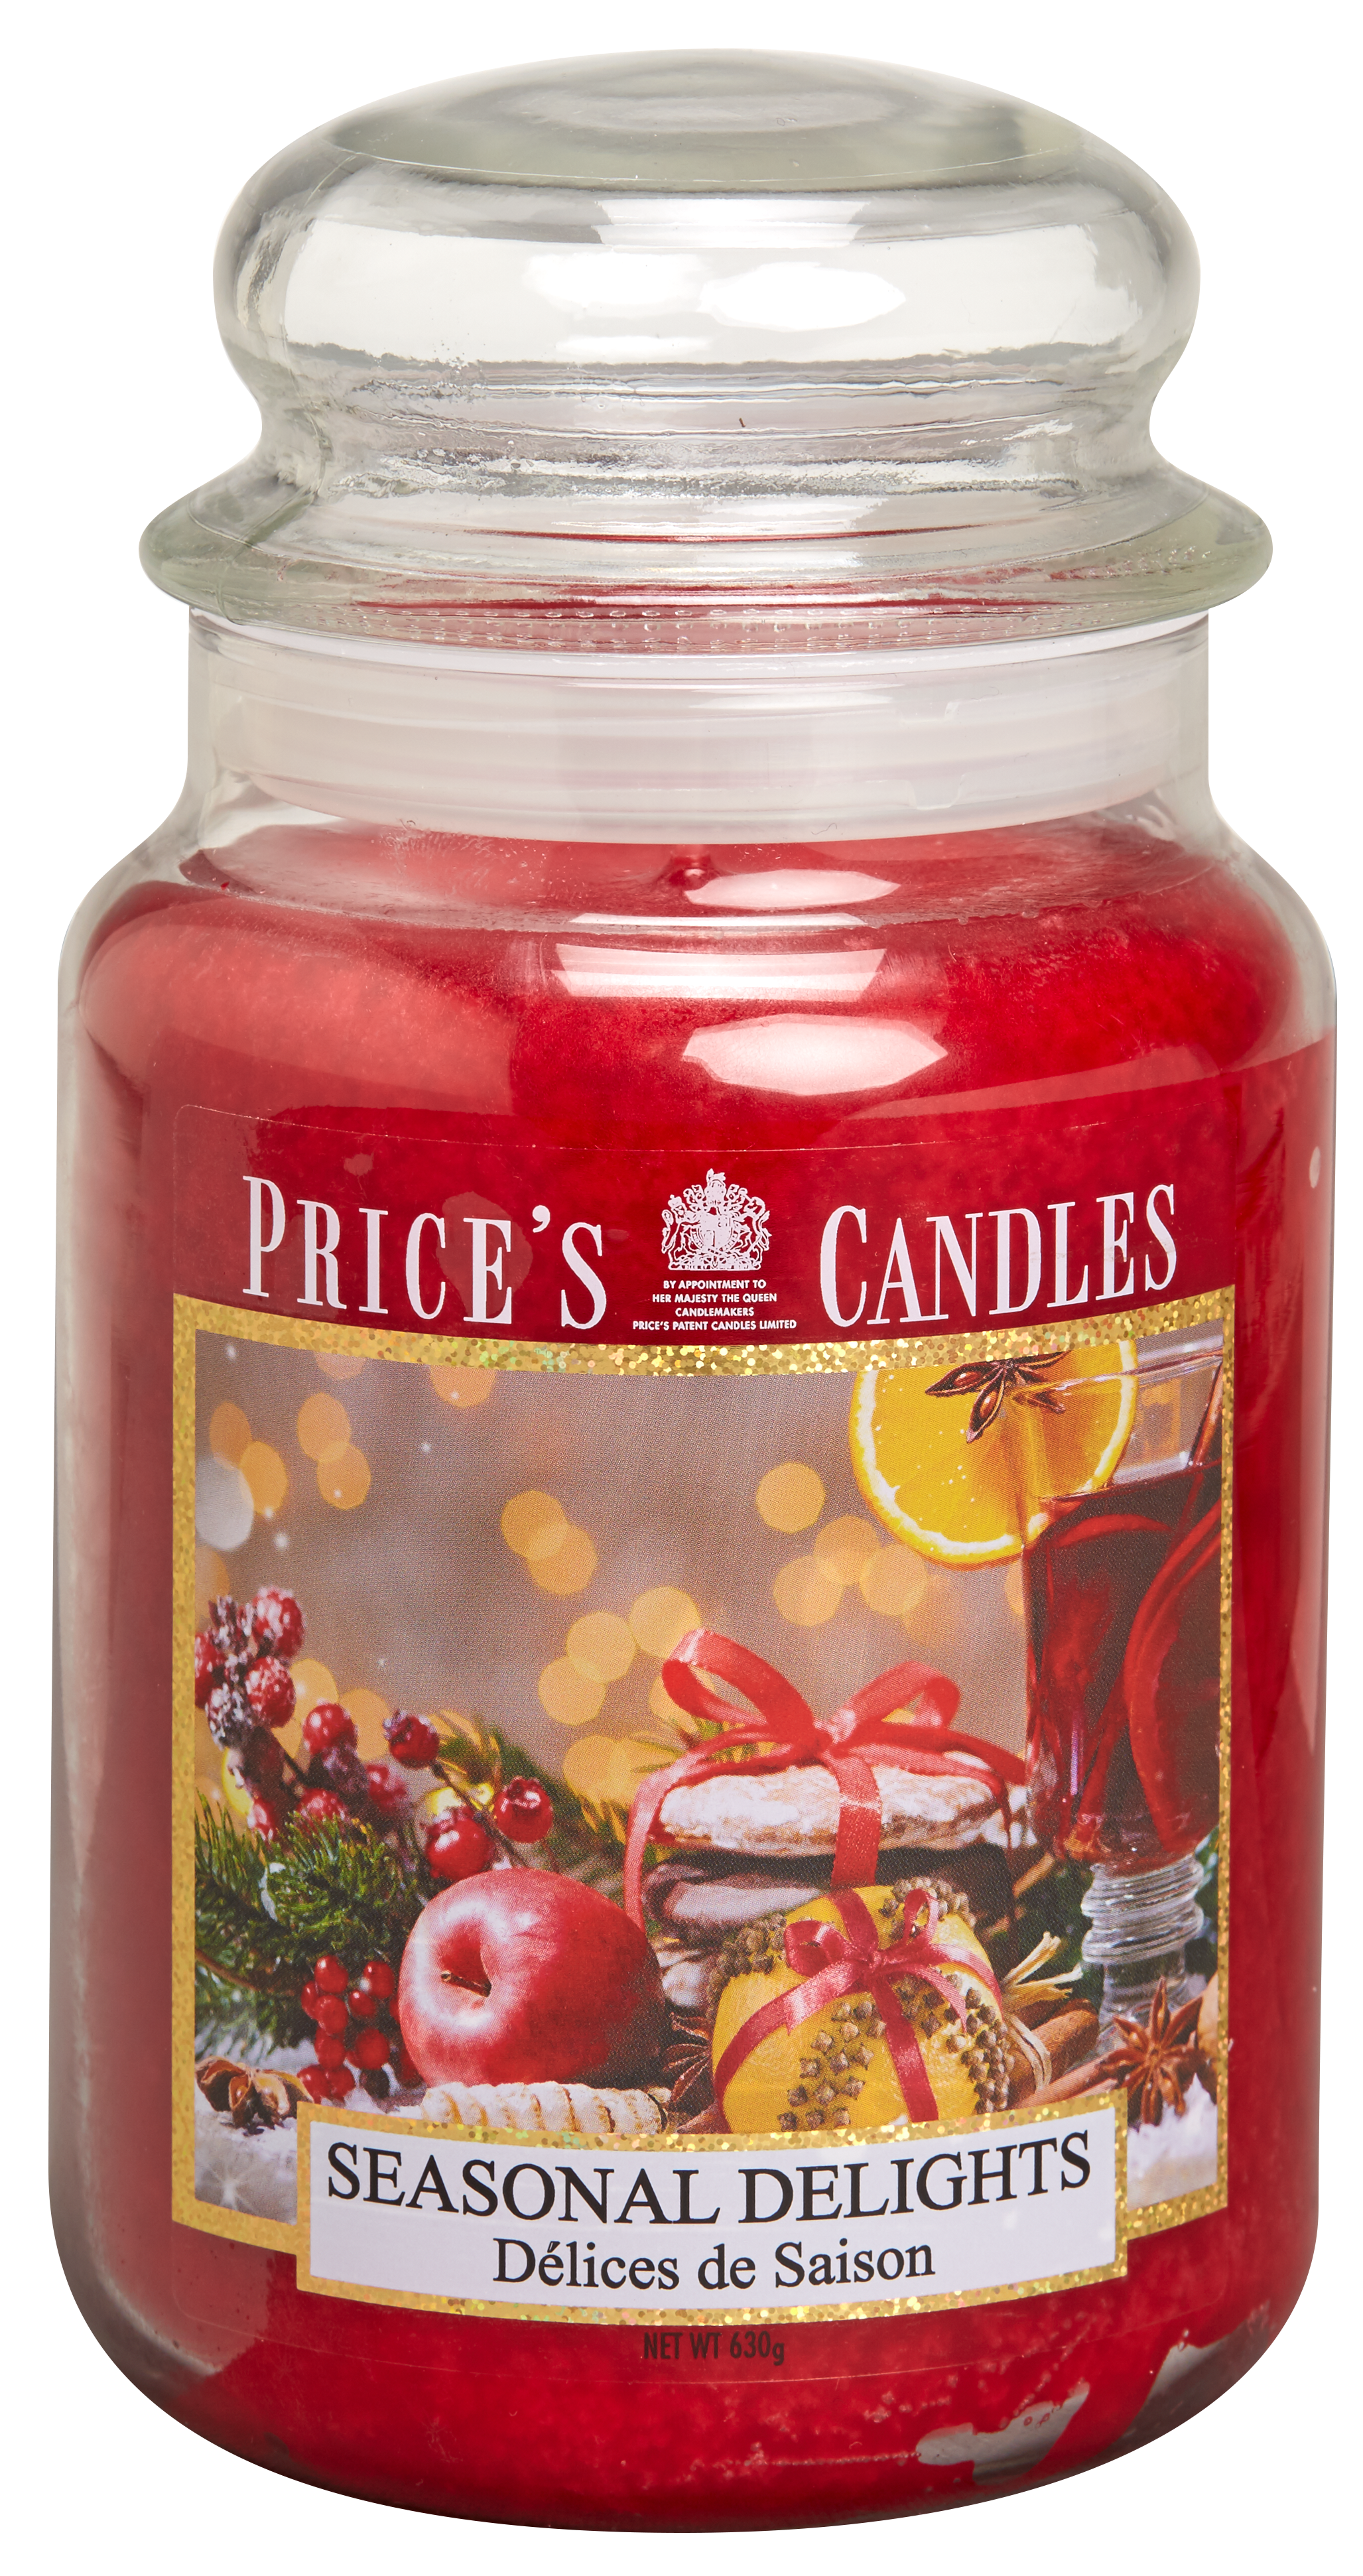 Prices Candle "Seasonal Delights" 630g  